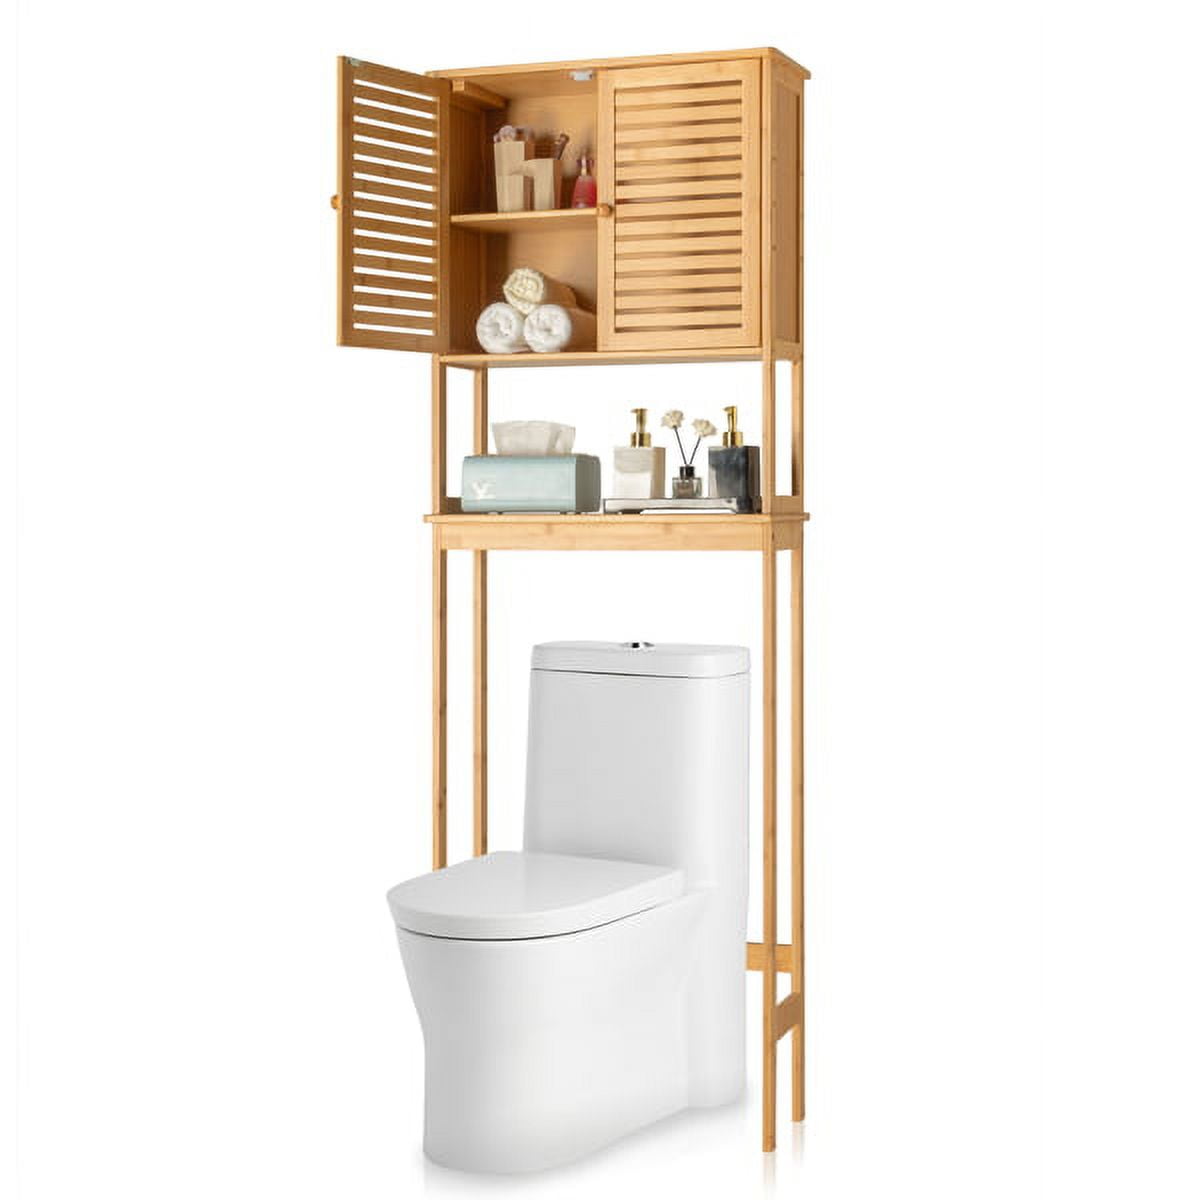 Hommoo Over The Toilet Storage Cabinet Rack, Bamboo Bathroom Space Saver  Laundry Room Corner Stand, Organizer Shelf for Restroom, Natural